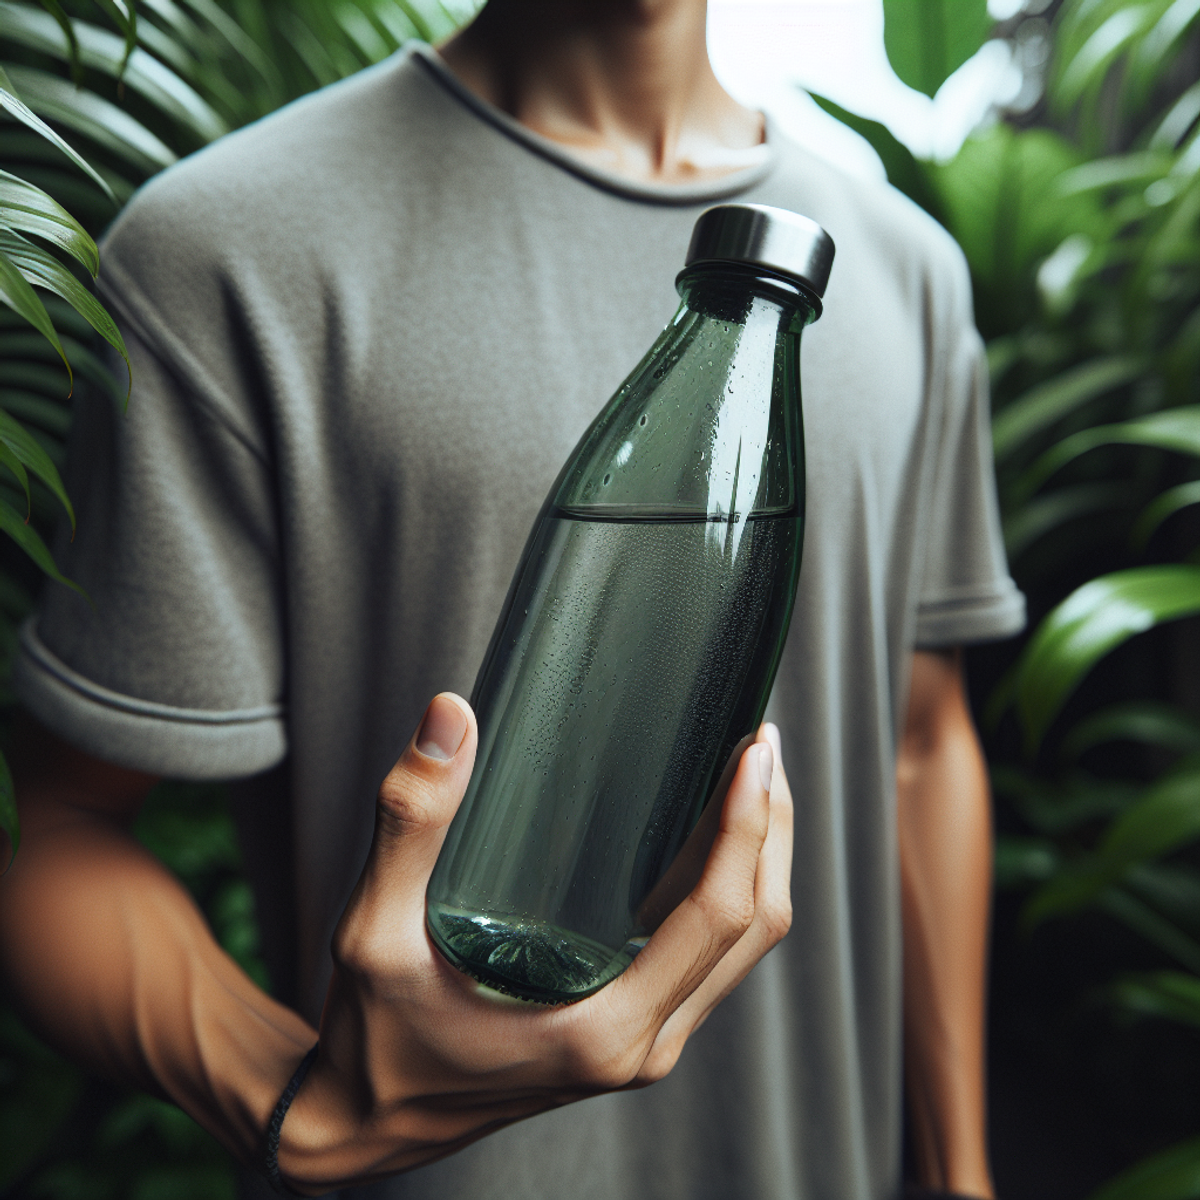 A close-up of a sleek glass water bottle held by a South Asian male against a backdrop of lush green vegetation.